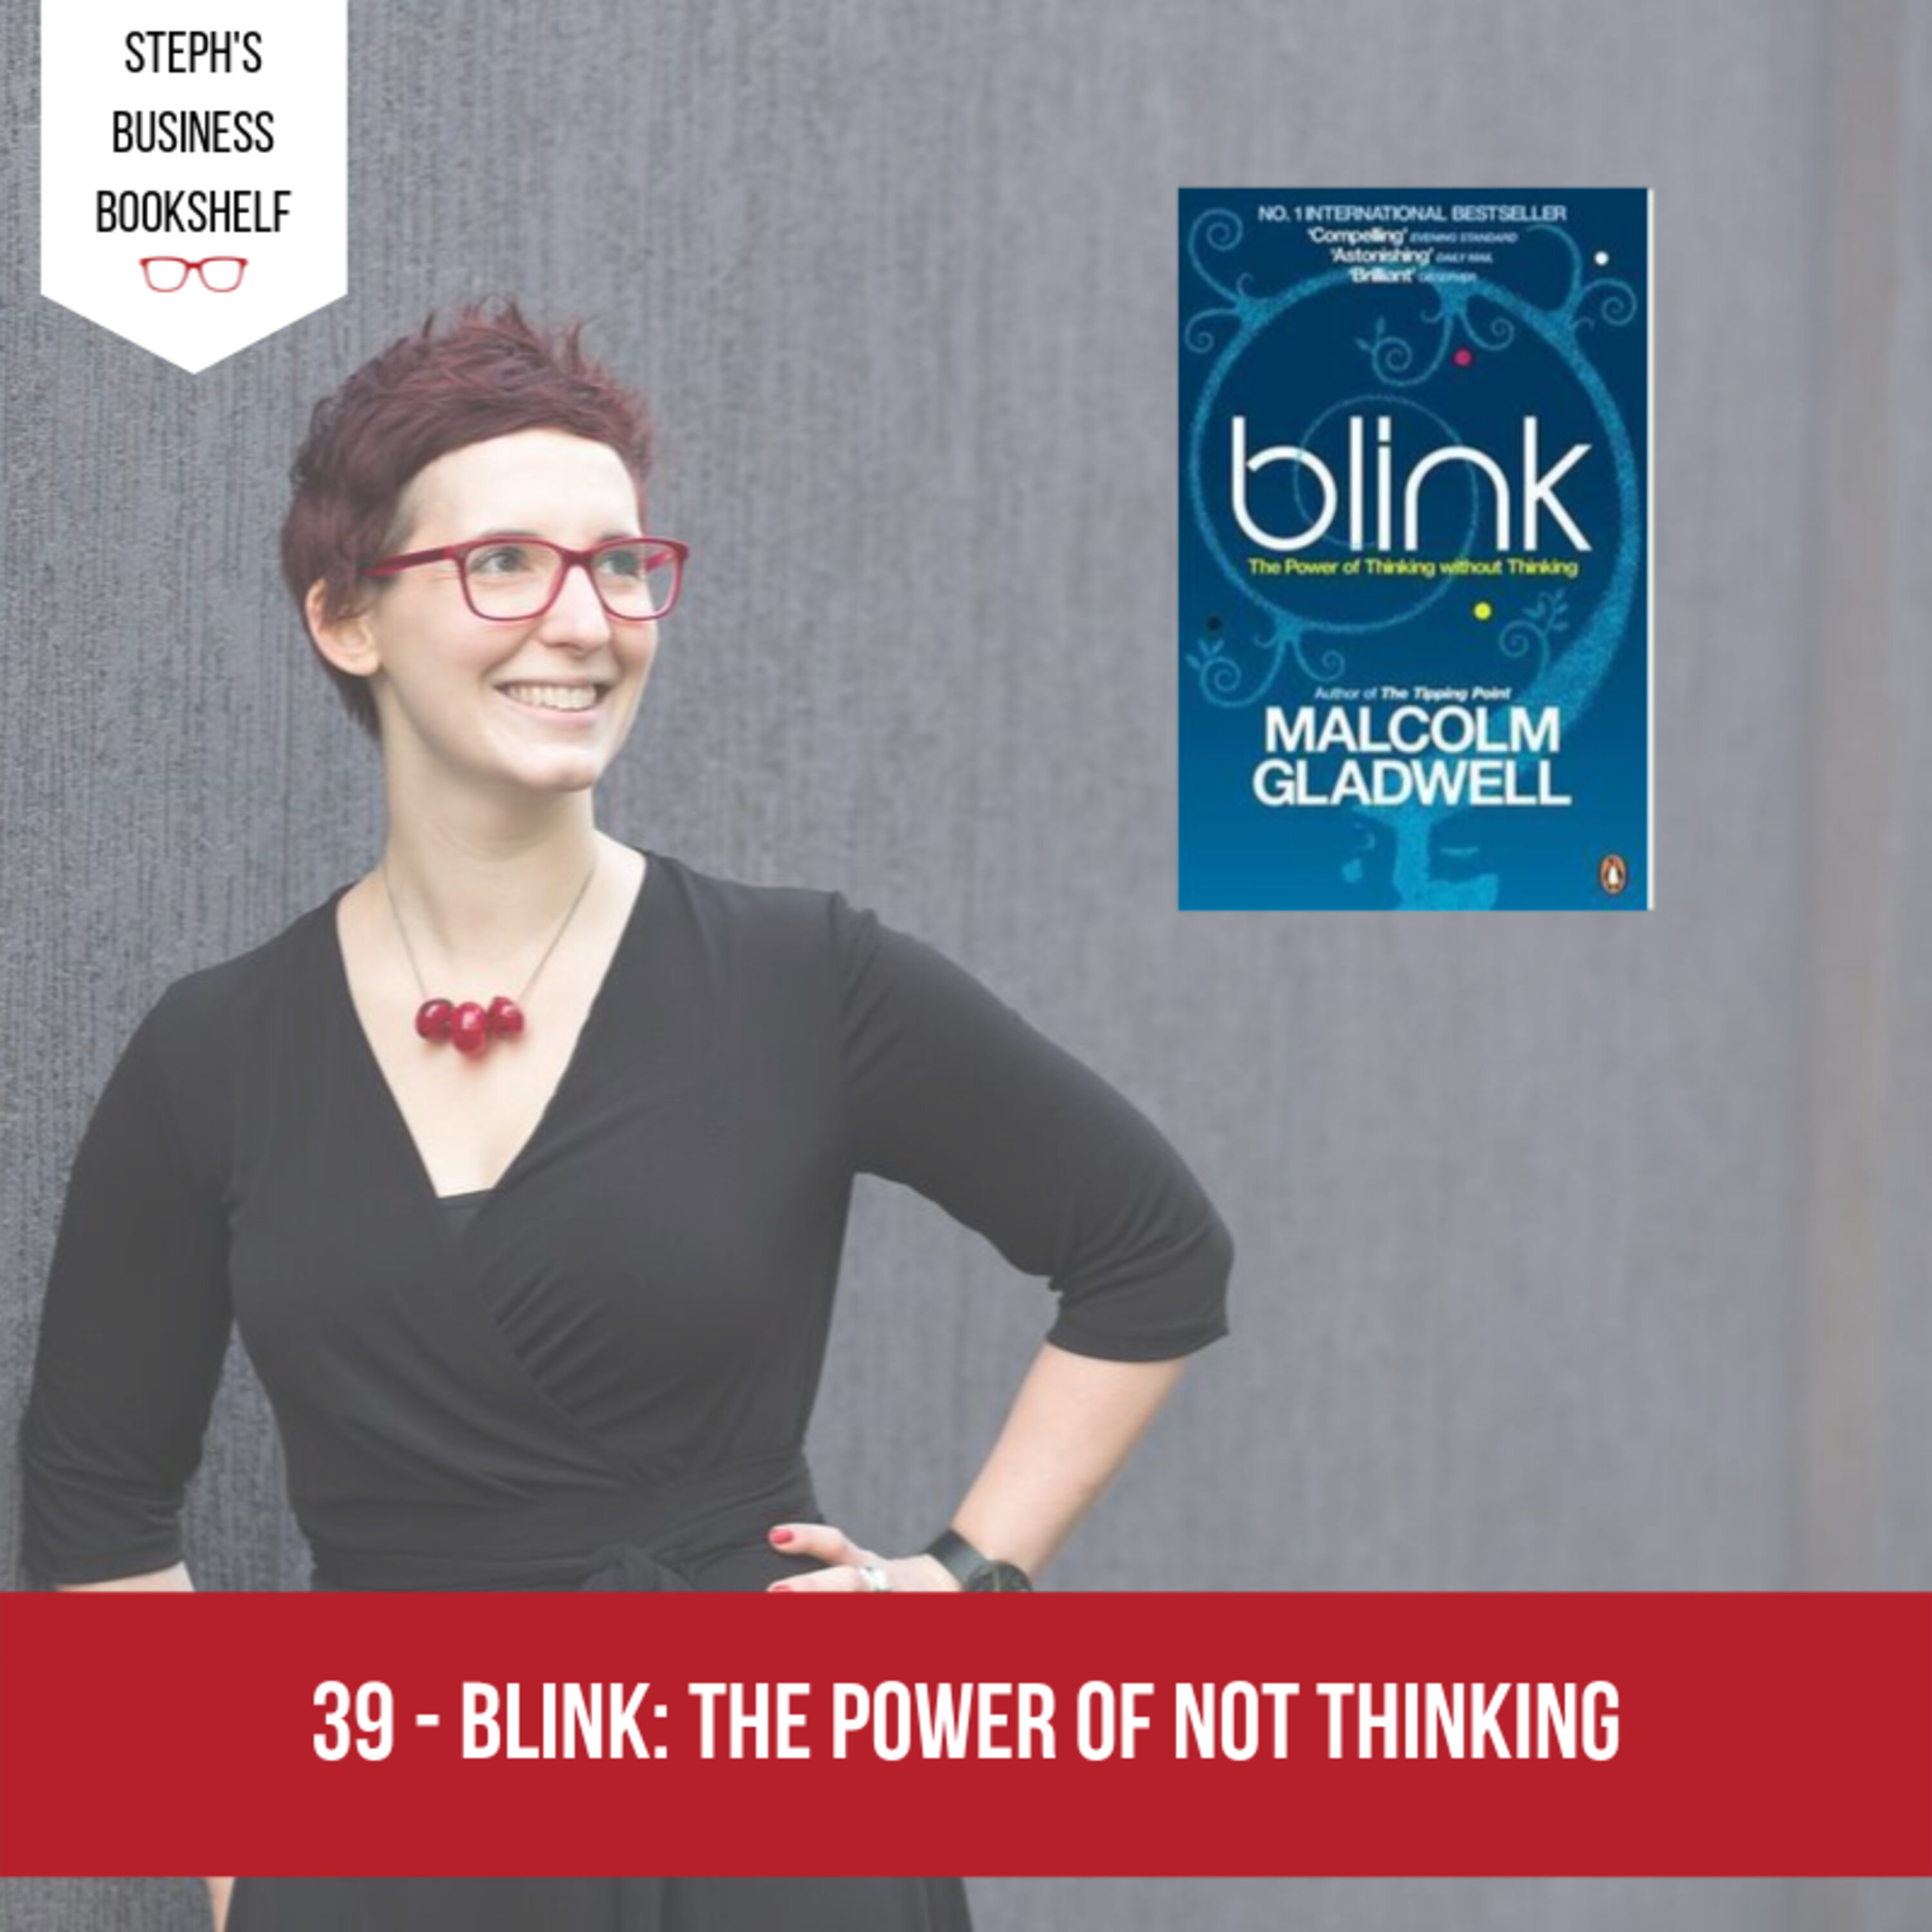 Blink by Malcolm Gladwell: the power of not thinking